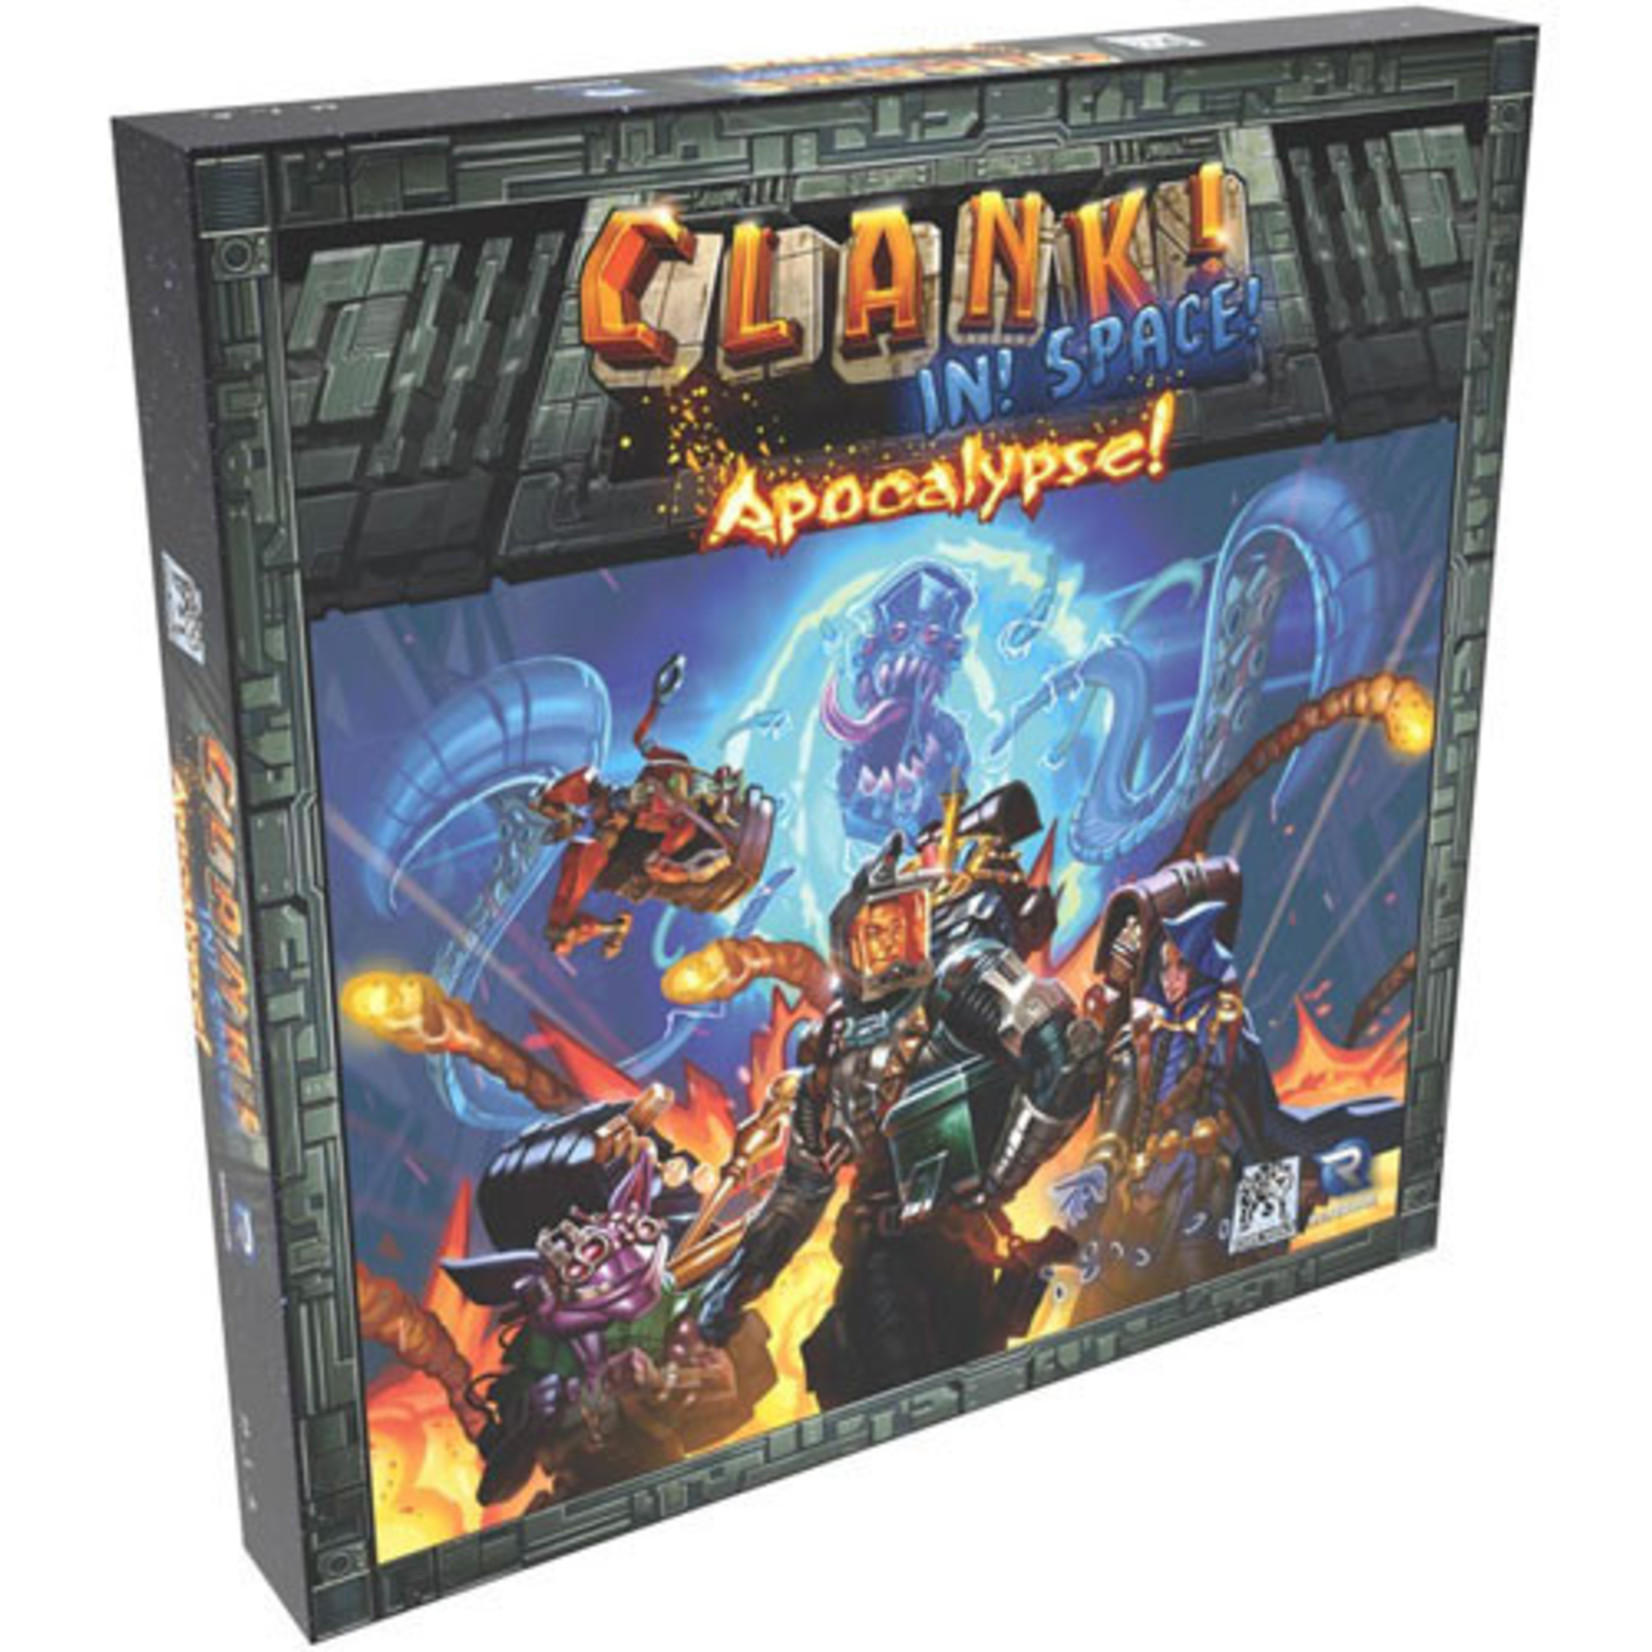 Dire Wolf Digital Clank! In! Space! Apocalypse! Expansion!